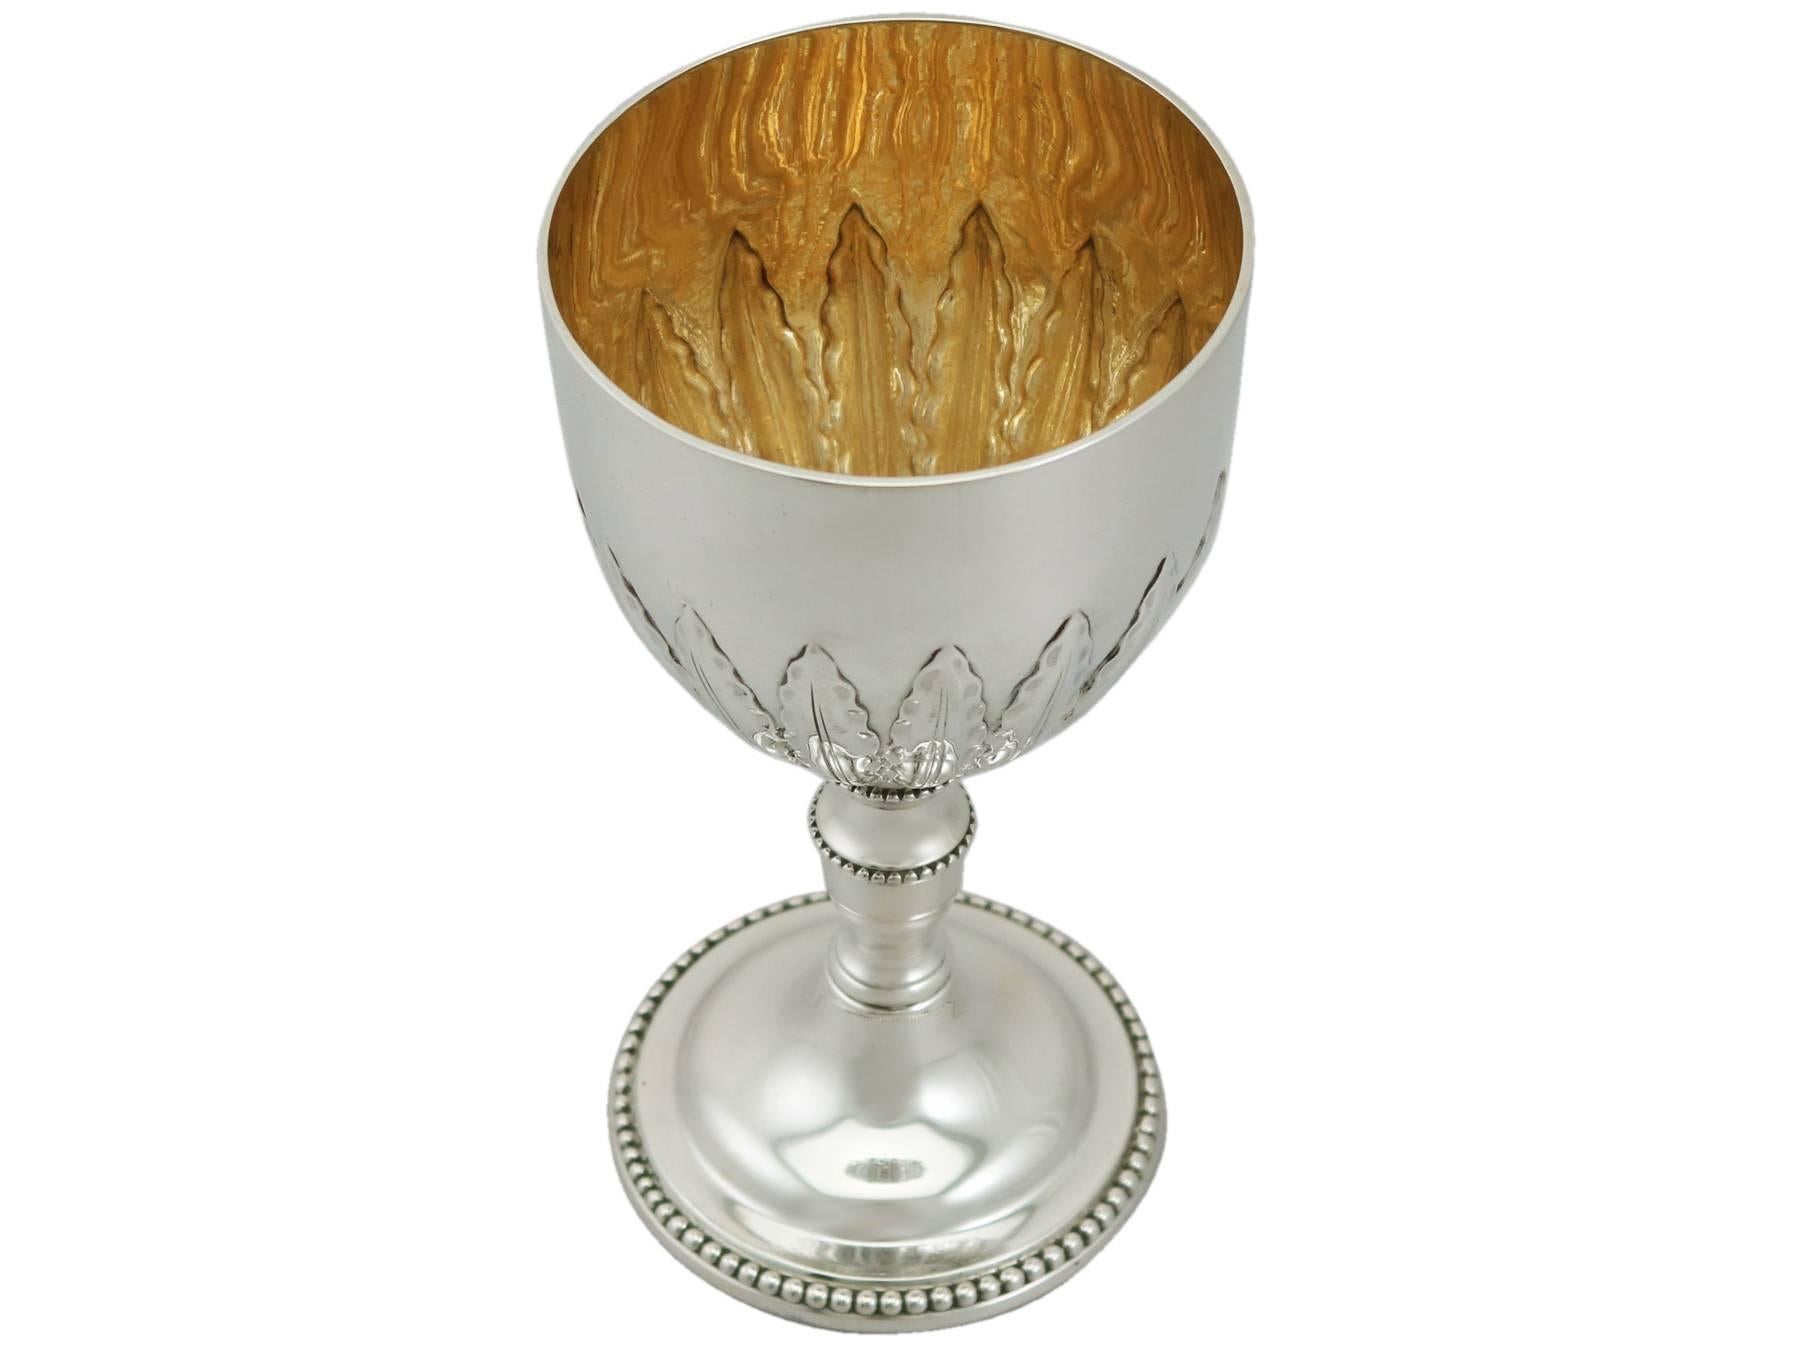 Gilt Antique 1770s George III Sterling Silver Goblet